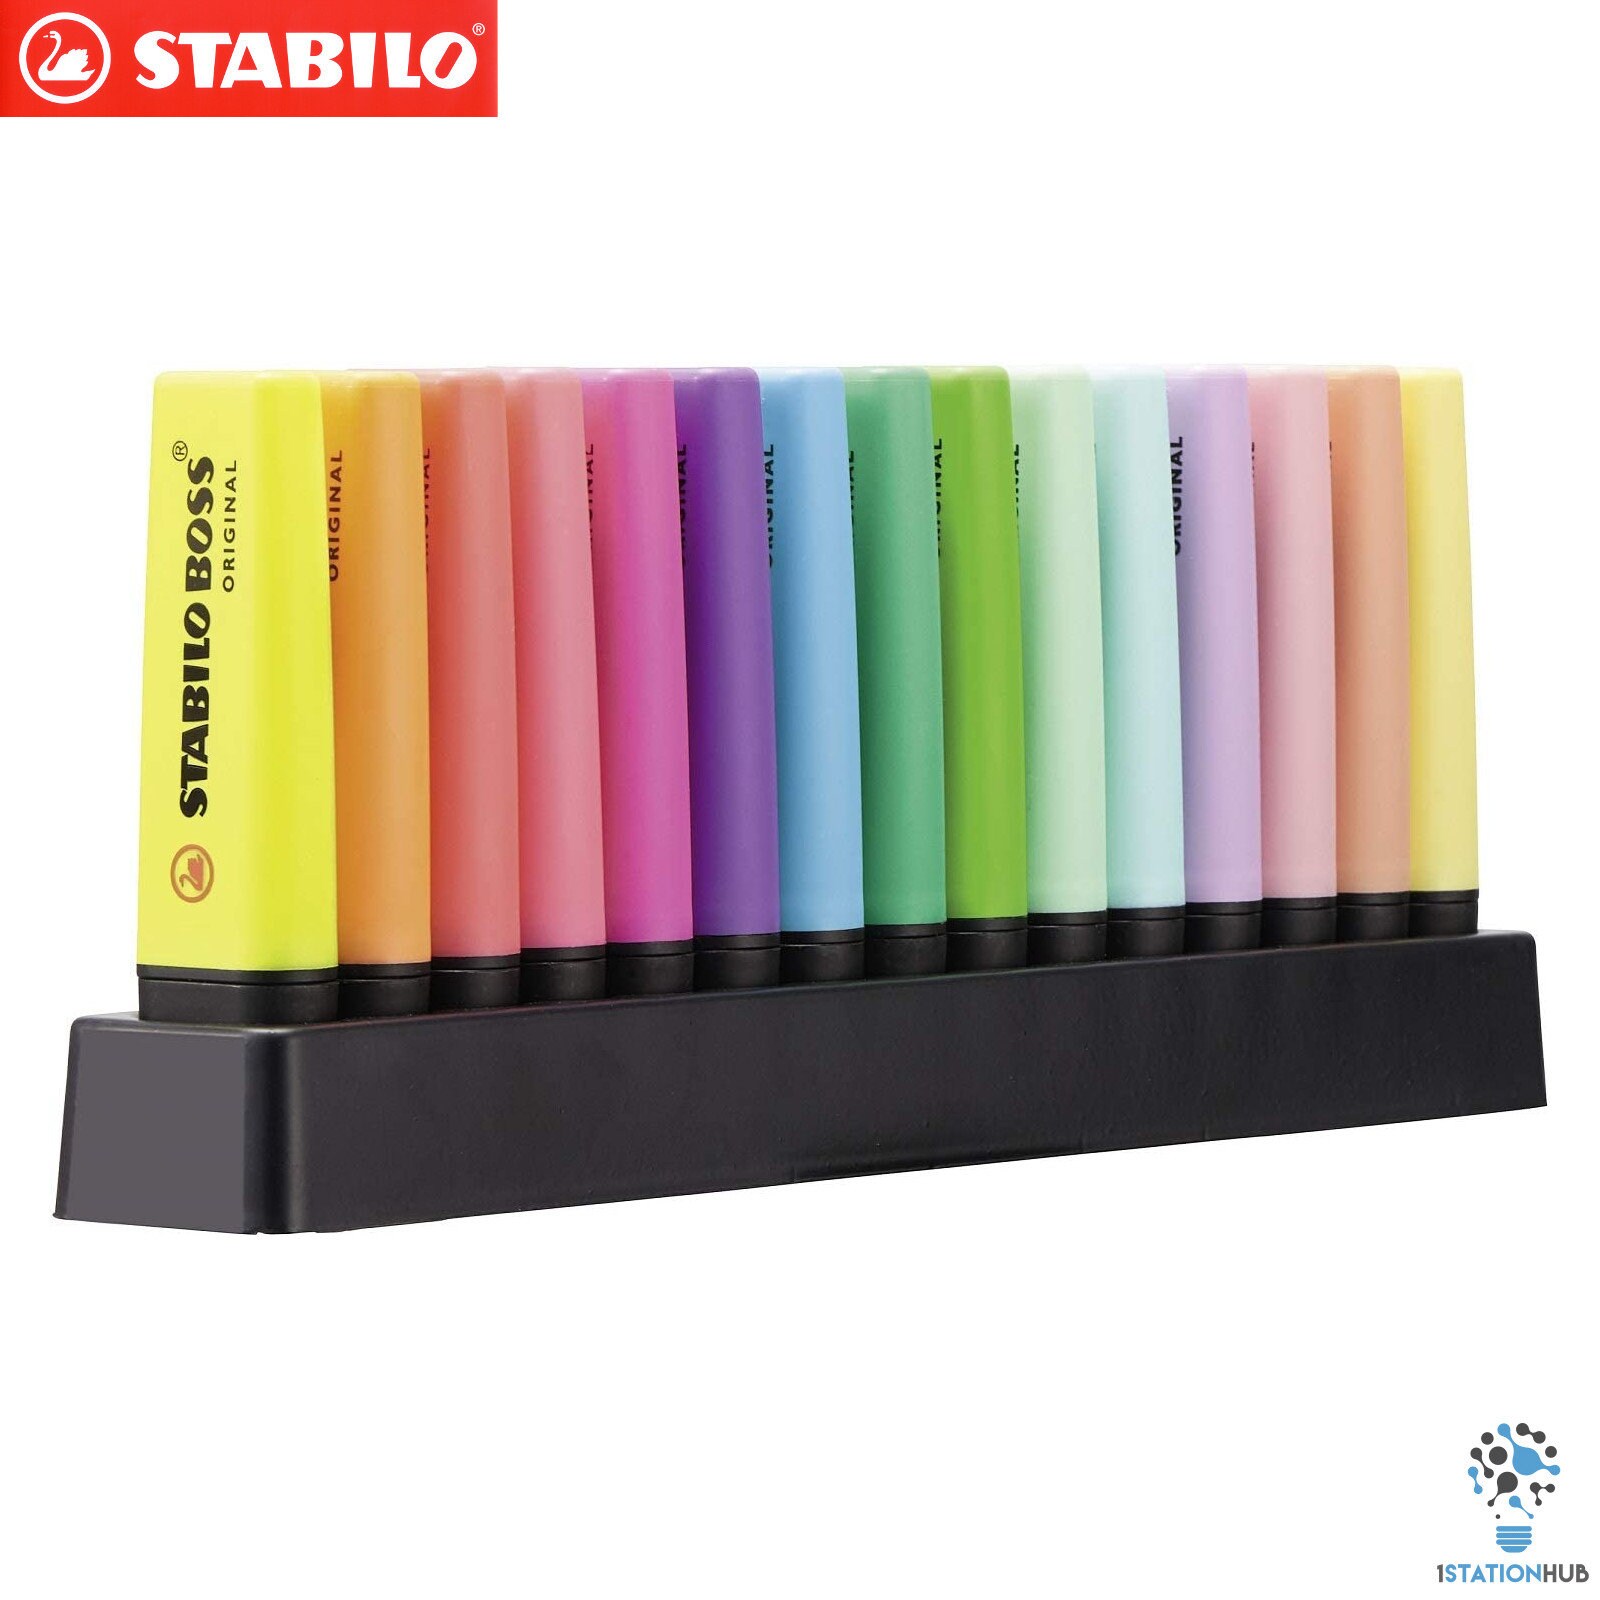 8 ORIGINAL STATIONERY CHUNKY HIGHLIGHTERS WITH 4 PASTEL & 4 NEON COLOURS SET. 